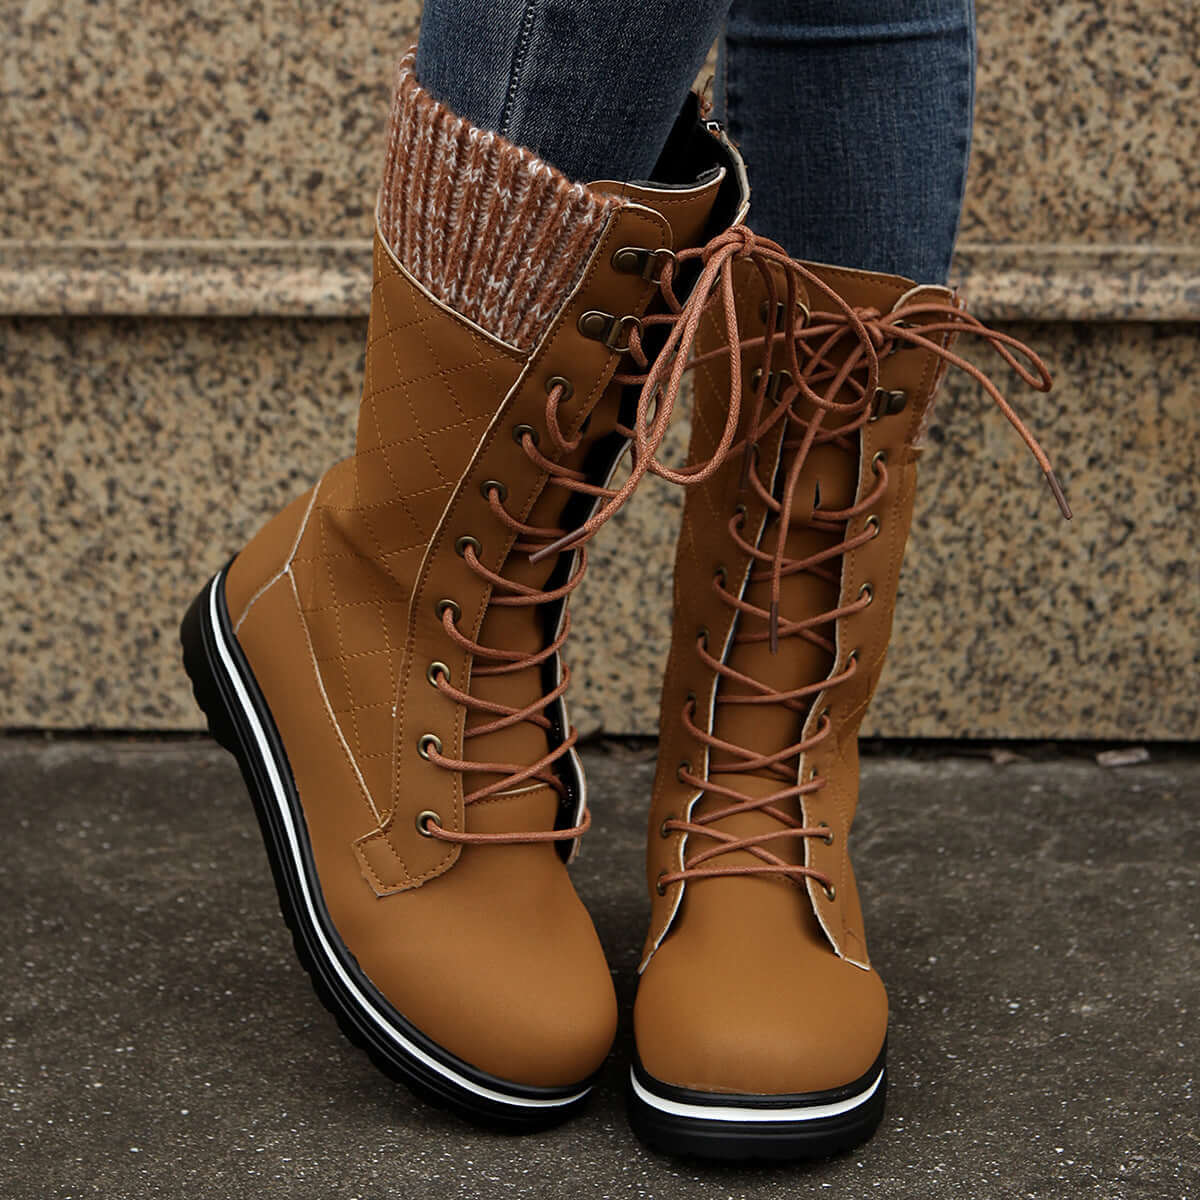 Motorcycle Boots - Flat Heels, Round Toe" by  VickyLei